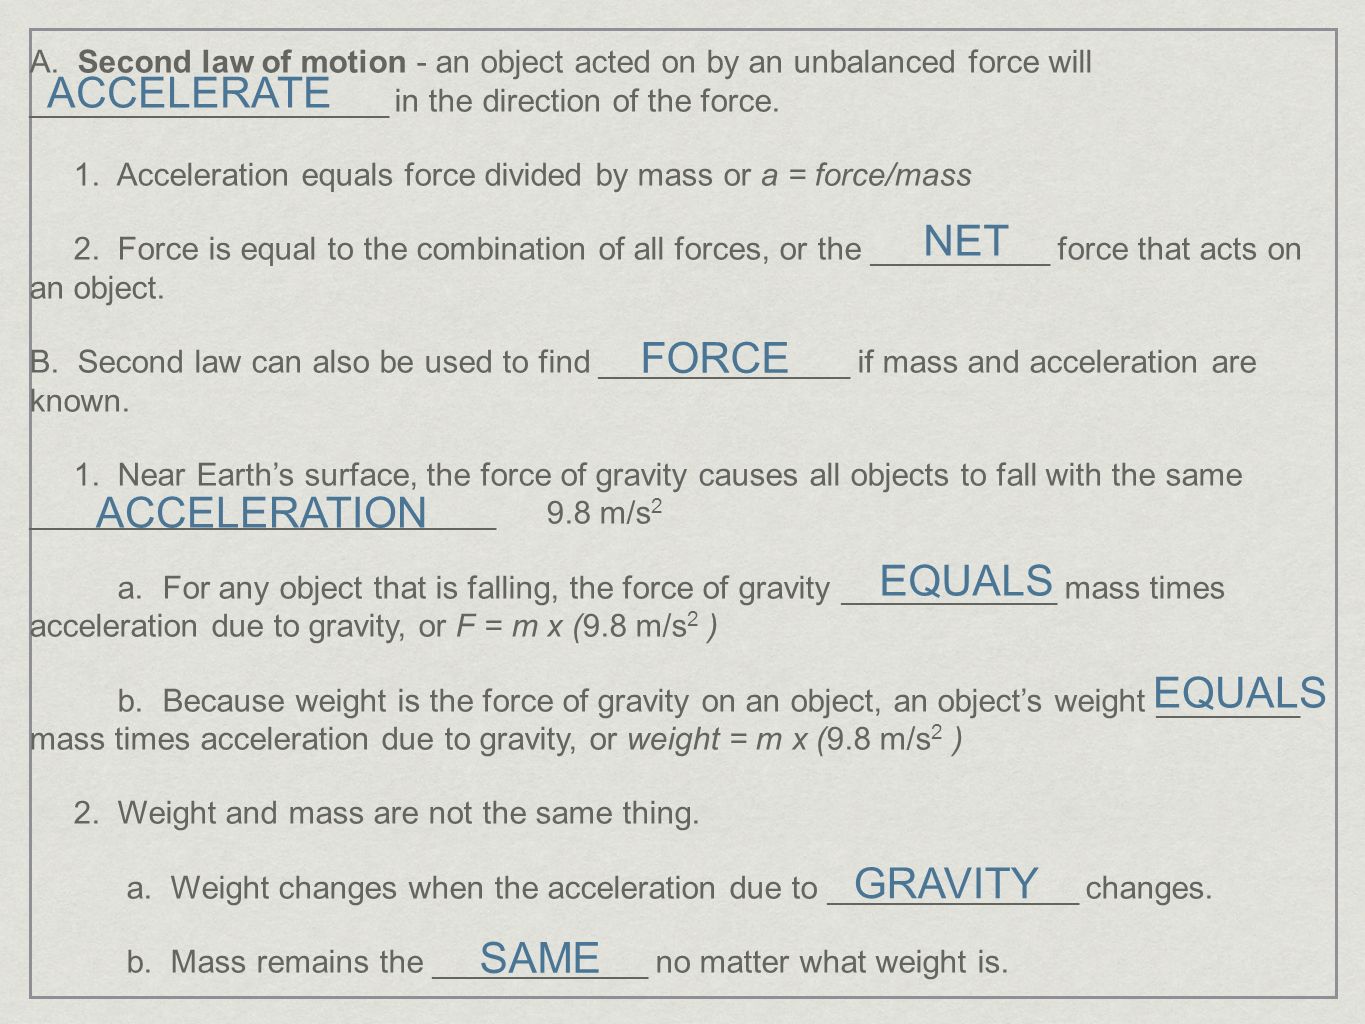 ACCELERATE NET FORCE ACCELERATION EQUALS EQUALS GRAVITY SAME